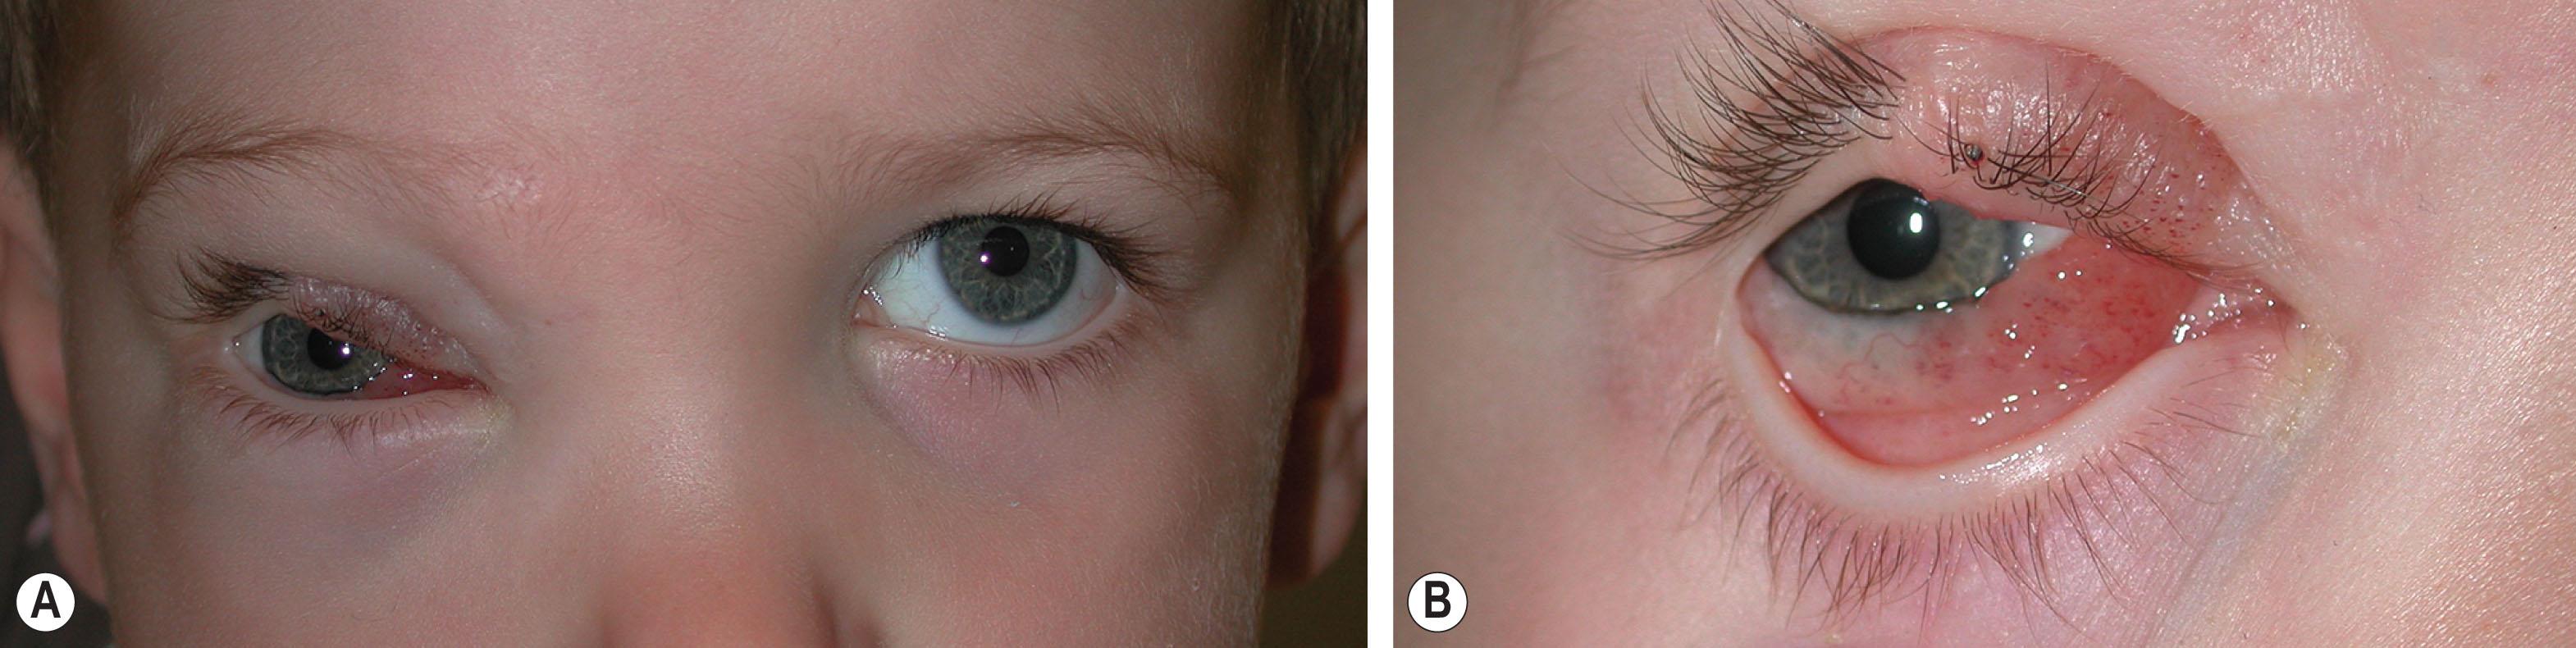 Fig. 20.5, (A) A 2-year-old boy with an extensive deep lymphatic-venous malformation of the right orbit has involvement of the medial right upper eyelid skin and conjunctiva. (B) Microcystic lymphatic components are seen on the medial upper eyelid and on the bulbar conjunctiva.